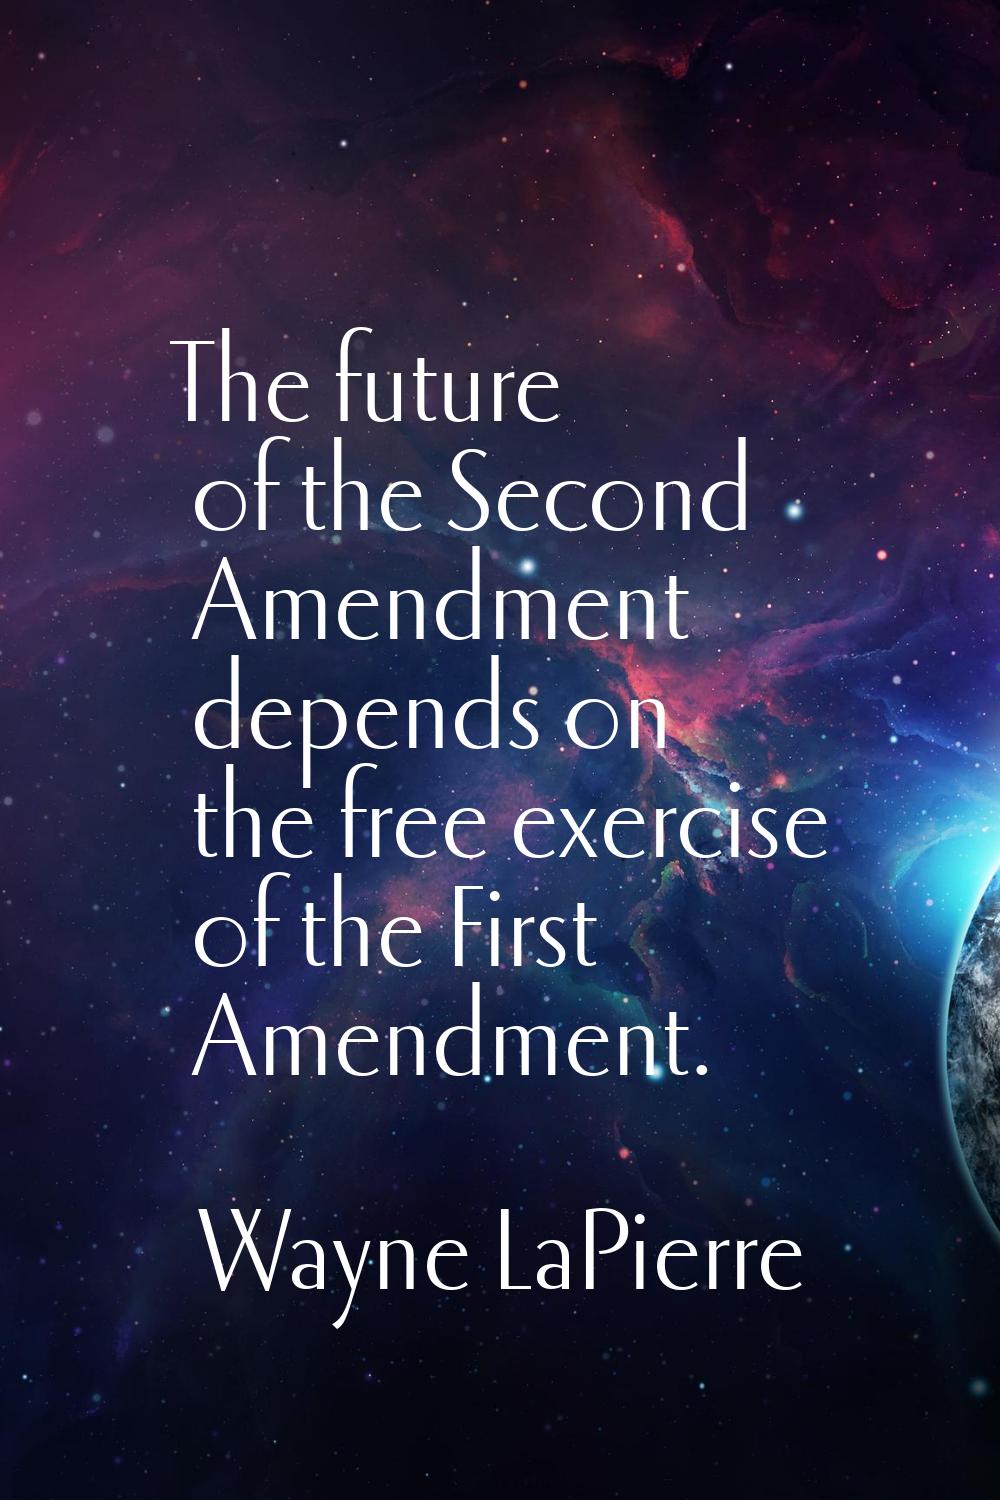 The future of the Second Amendment depends on the free exercise of the First Amendment.